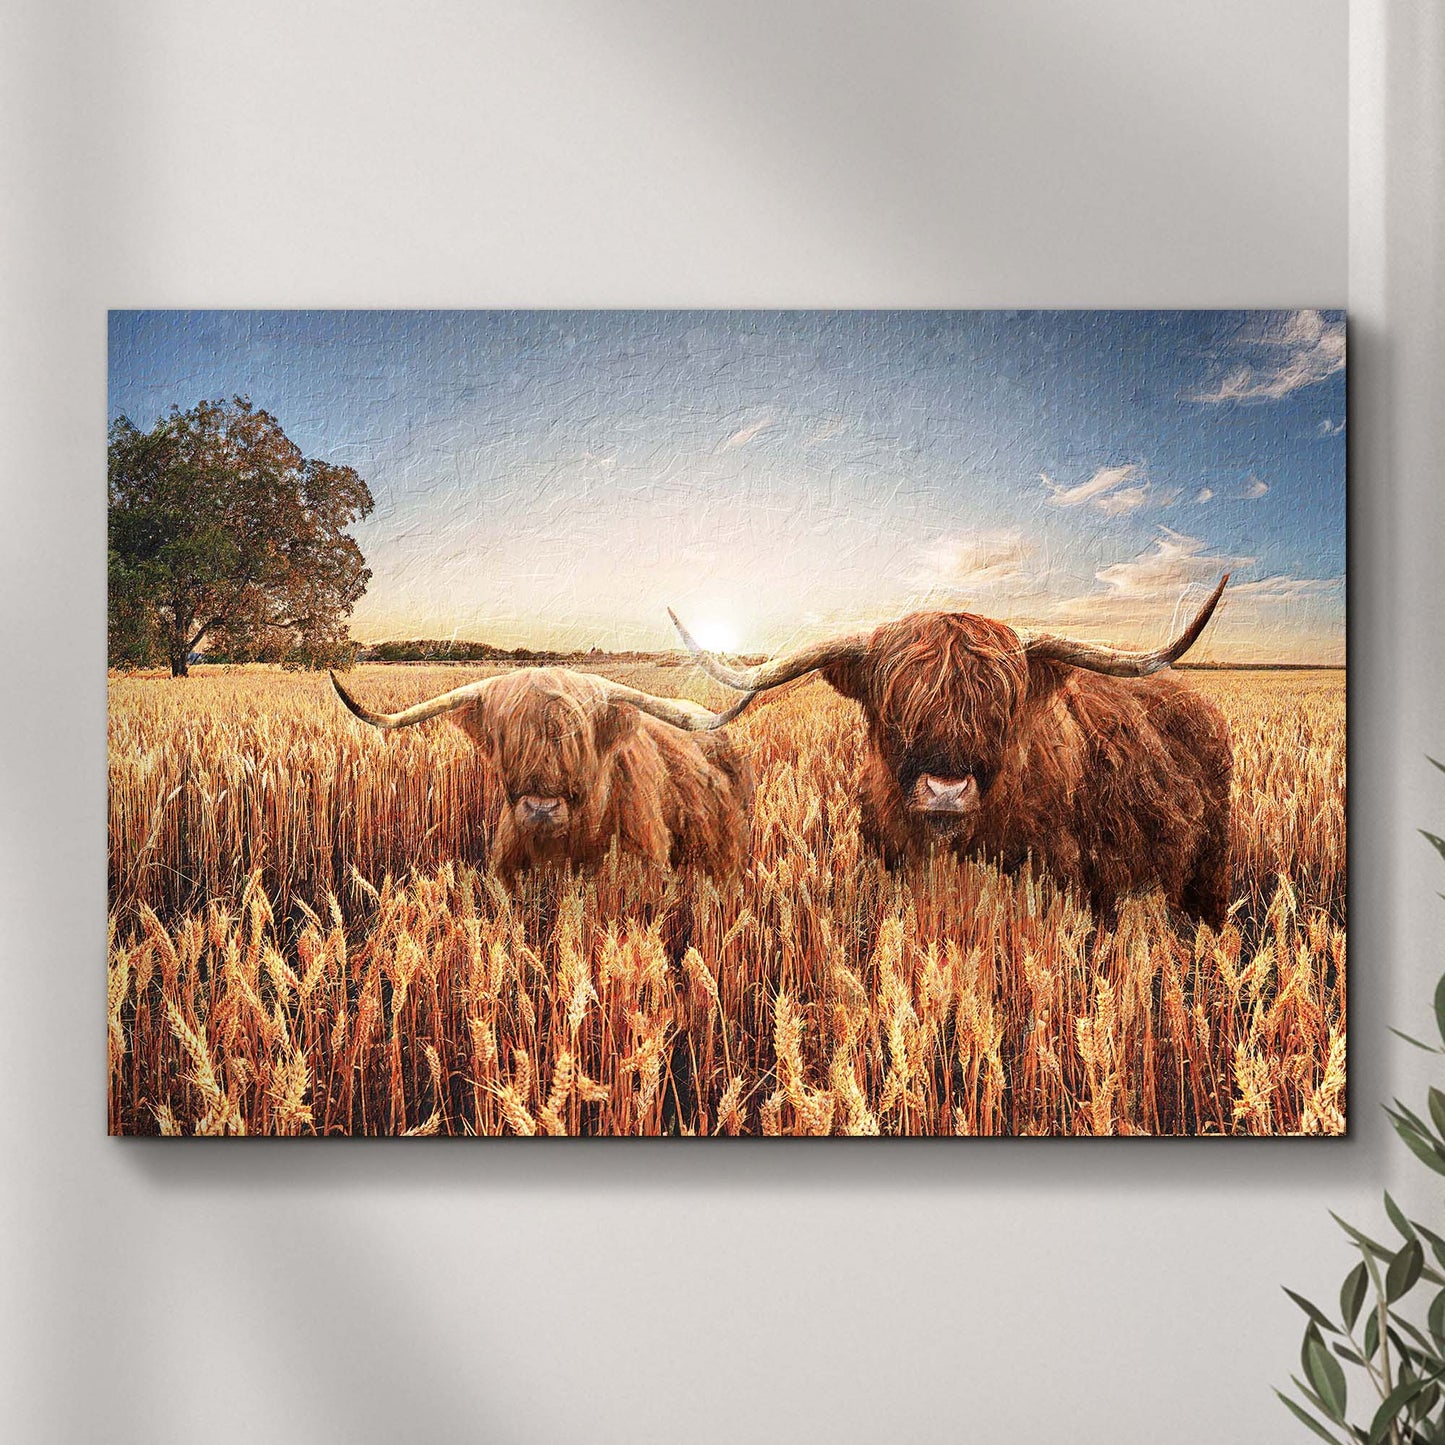 Highland Cow In Wheatfield Canvas Wall Art - Image by Tailored Canvases